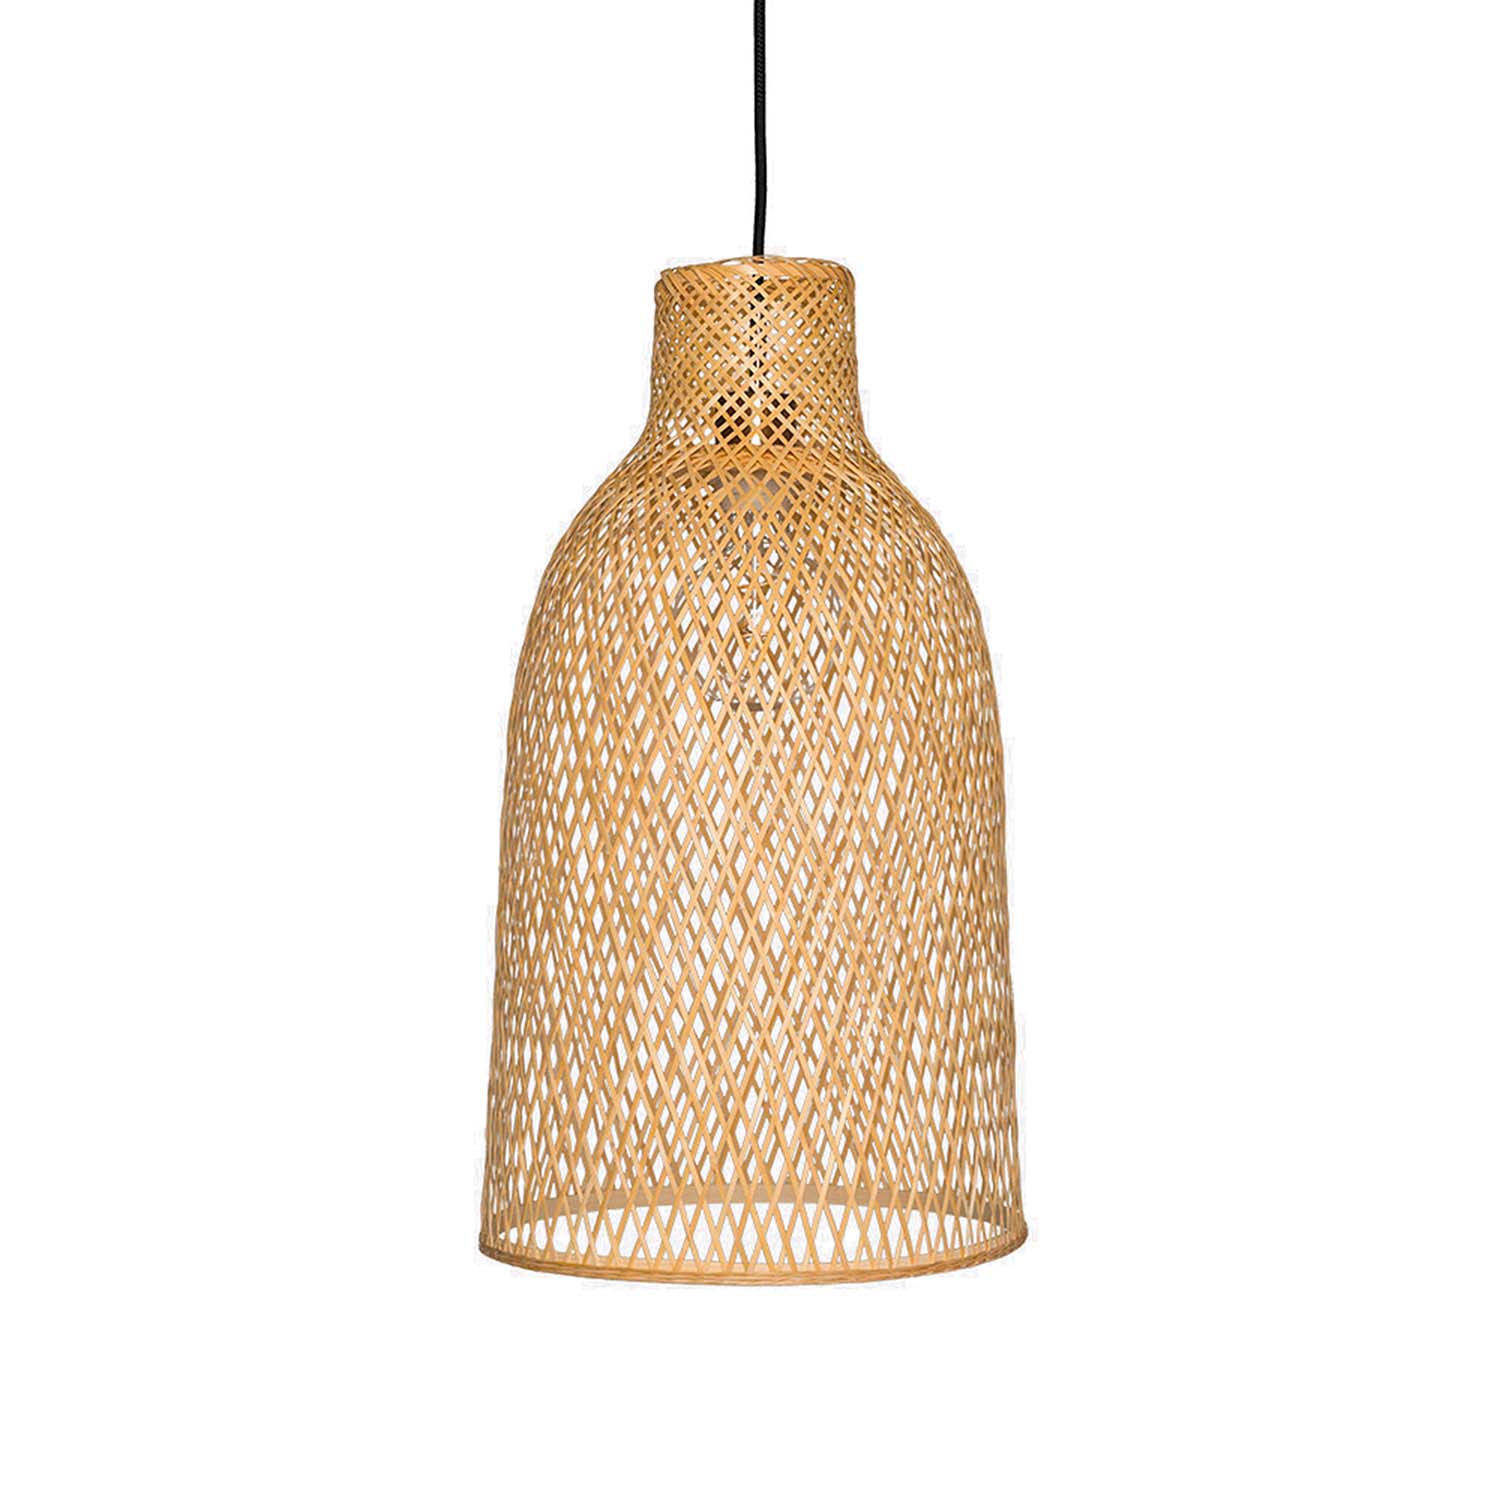 M2 - Handcrafted woven bamboo bell pendant light